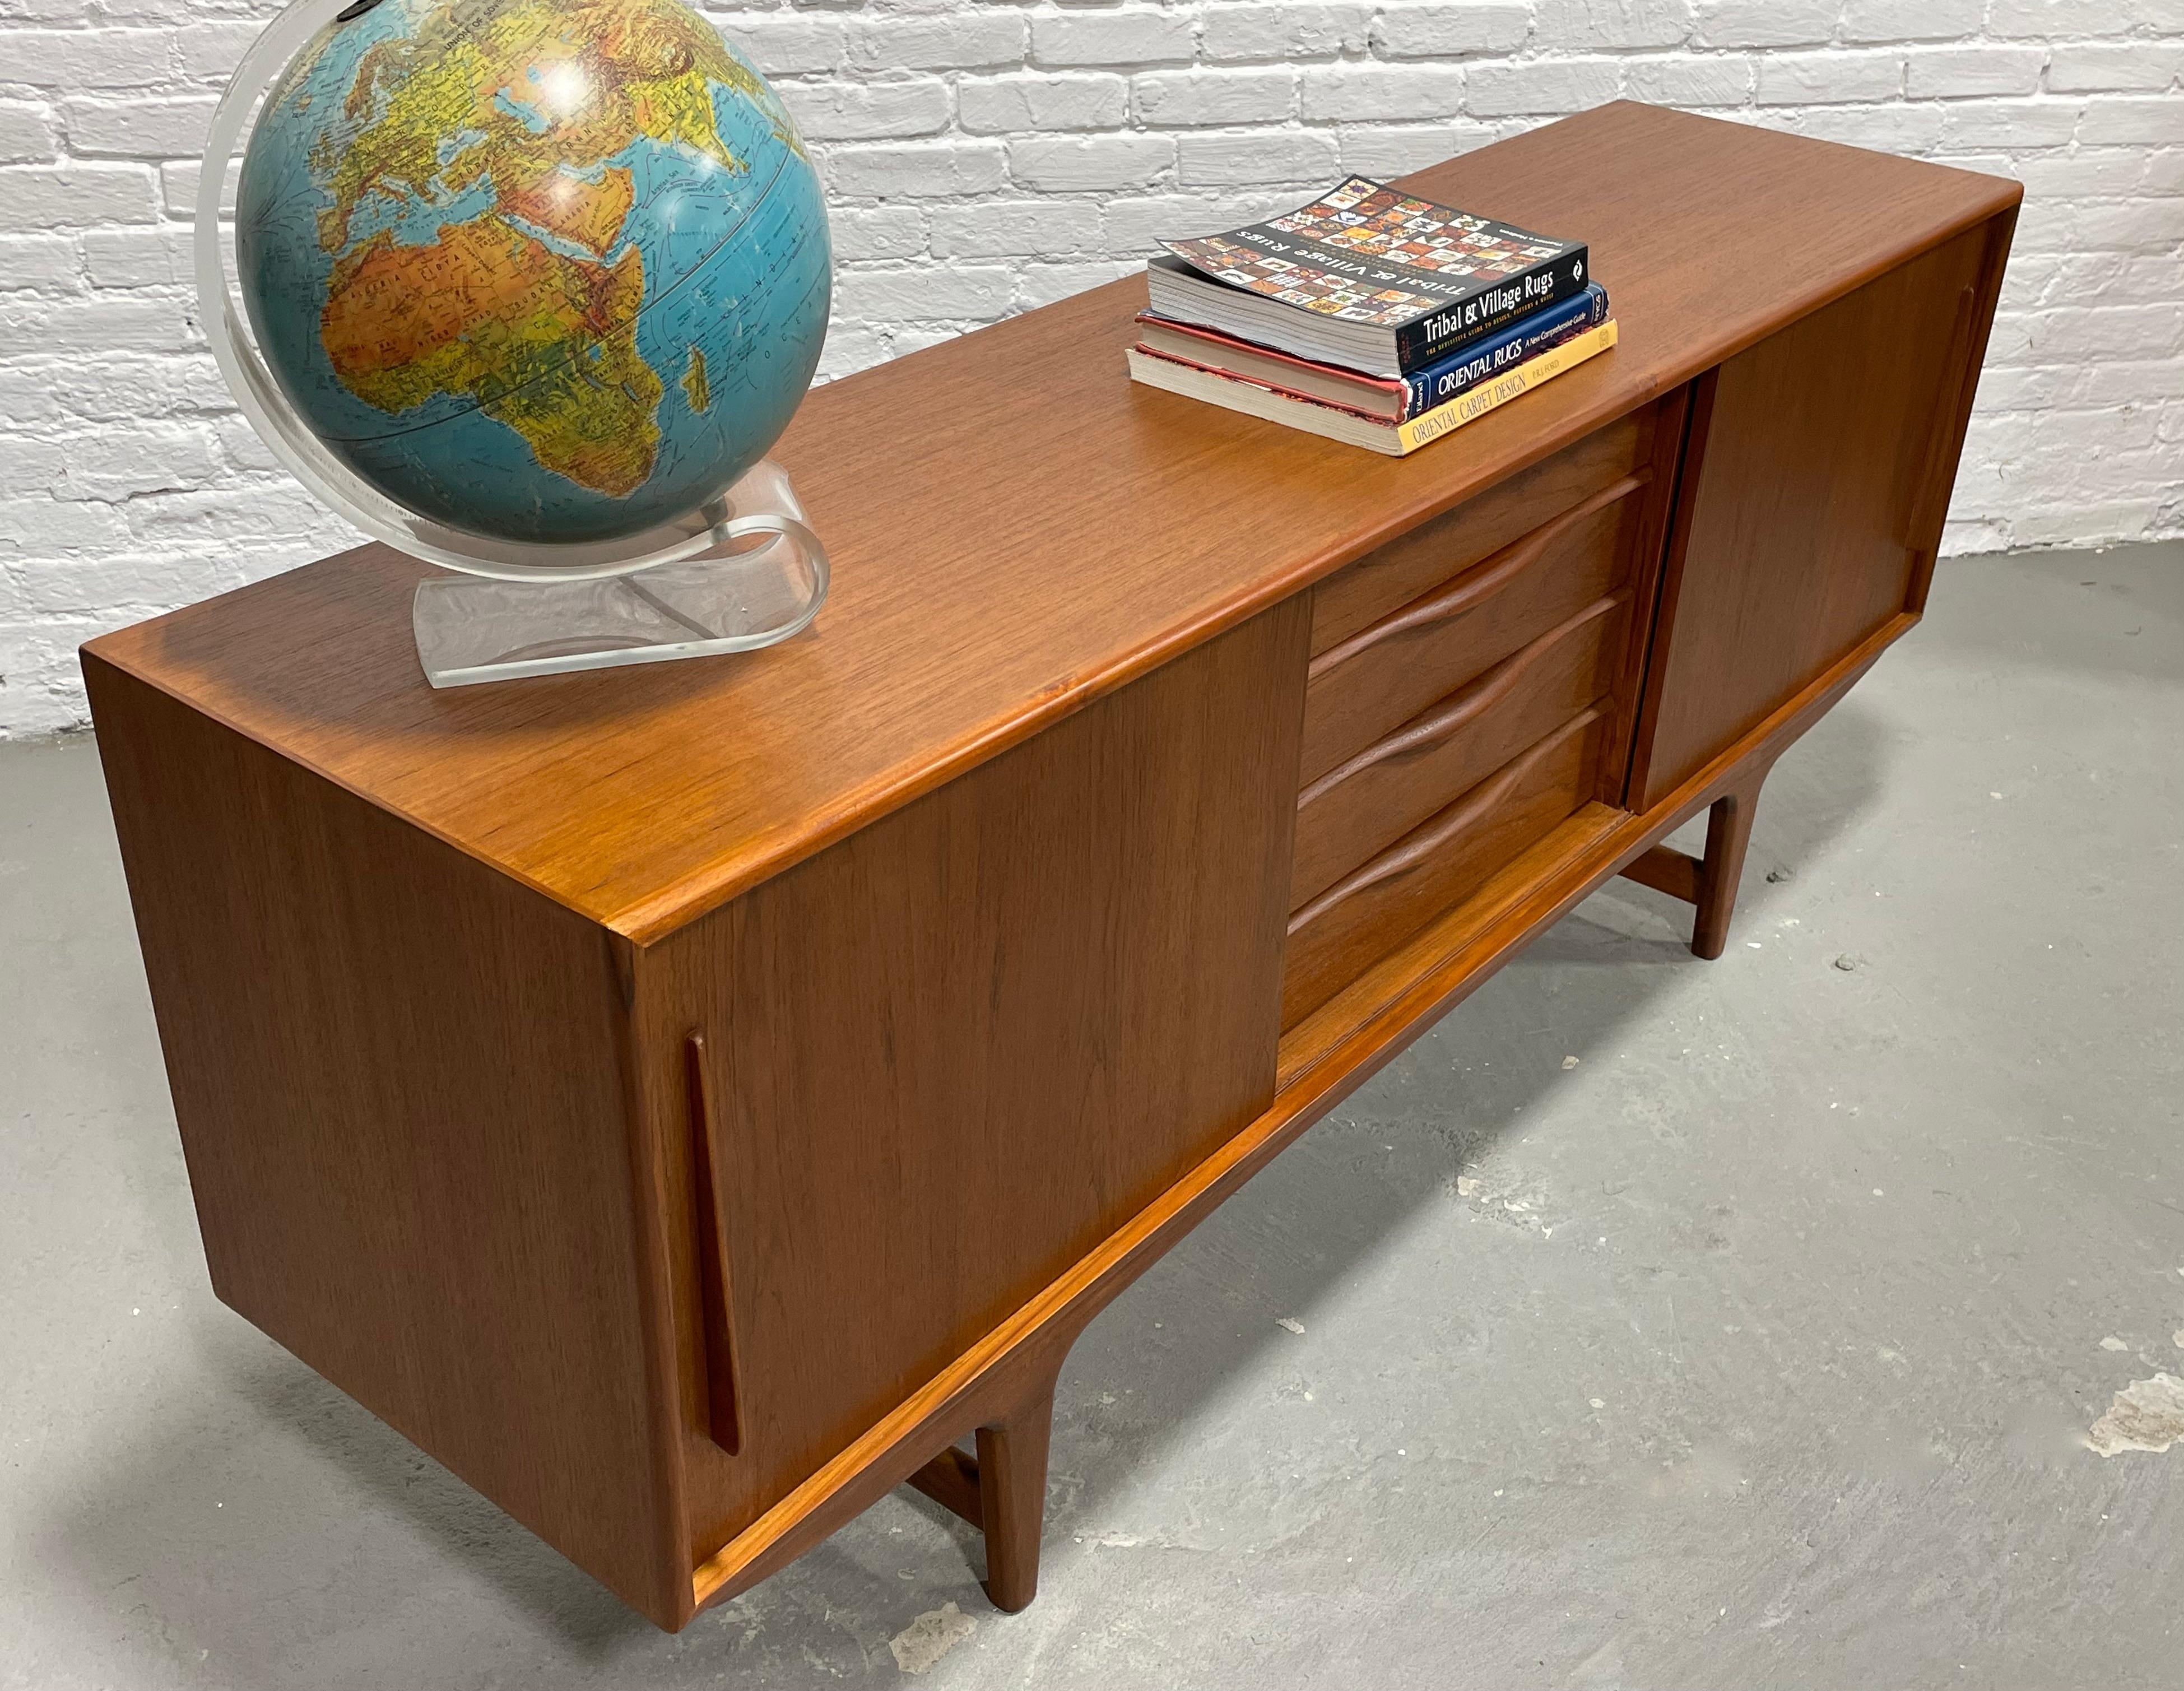 Long Sculpted Mid-Century Modern Styled Danish Teak Credenza For Sale 6